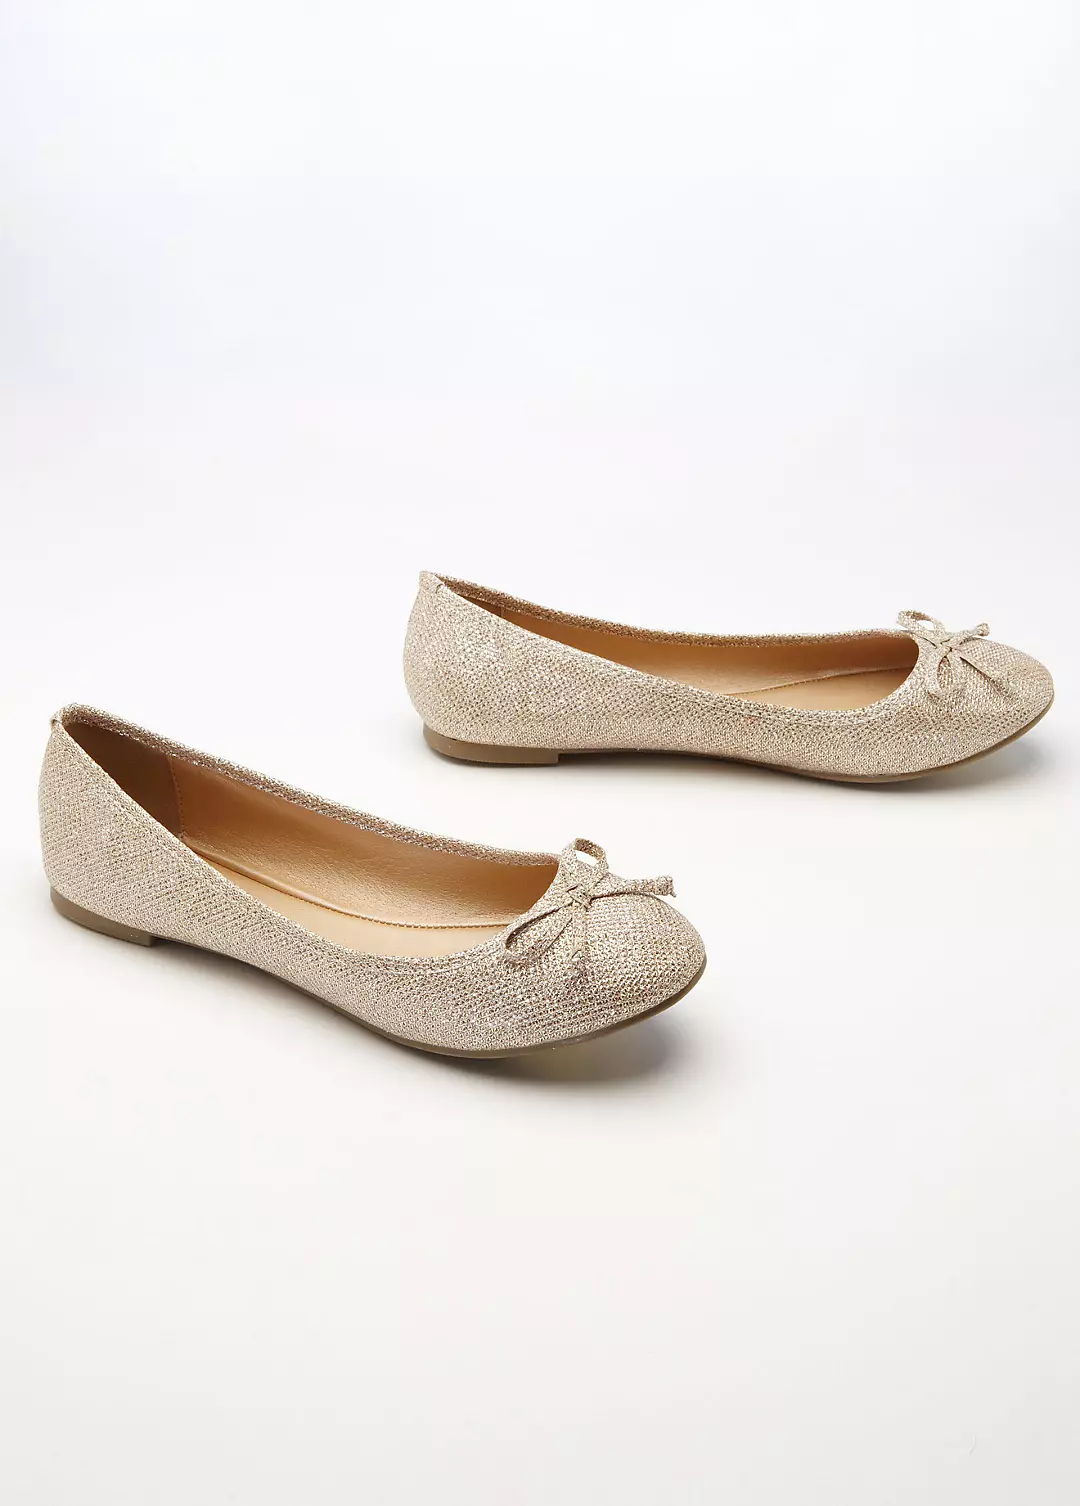 Glitter Ballet Flat with Bow Detail Image